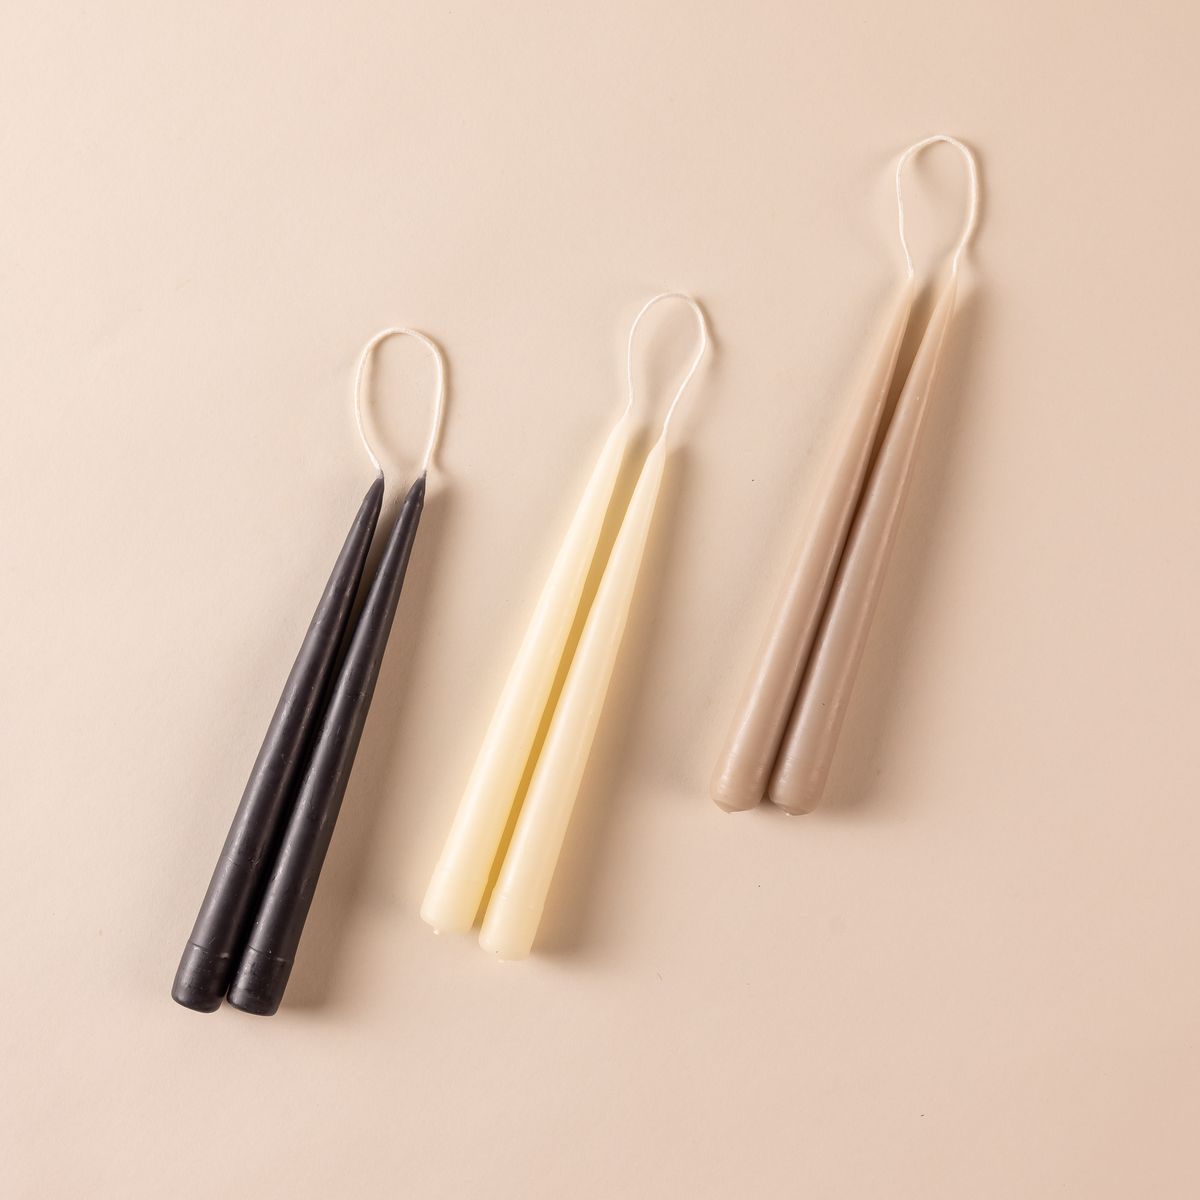 Three pairs of taper candles lined up in black, cream, and taupe colors.